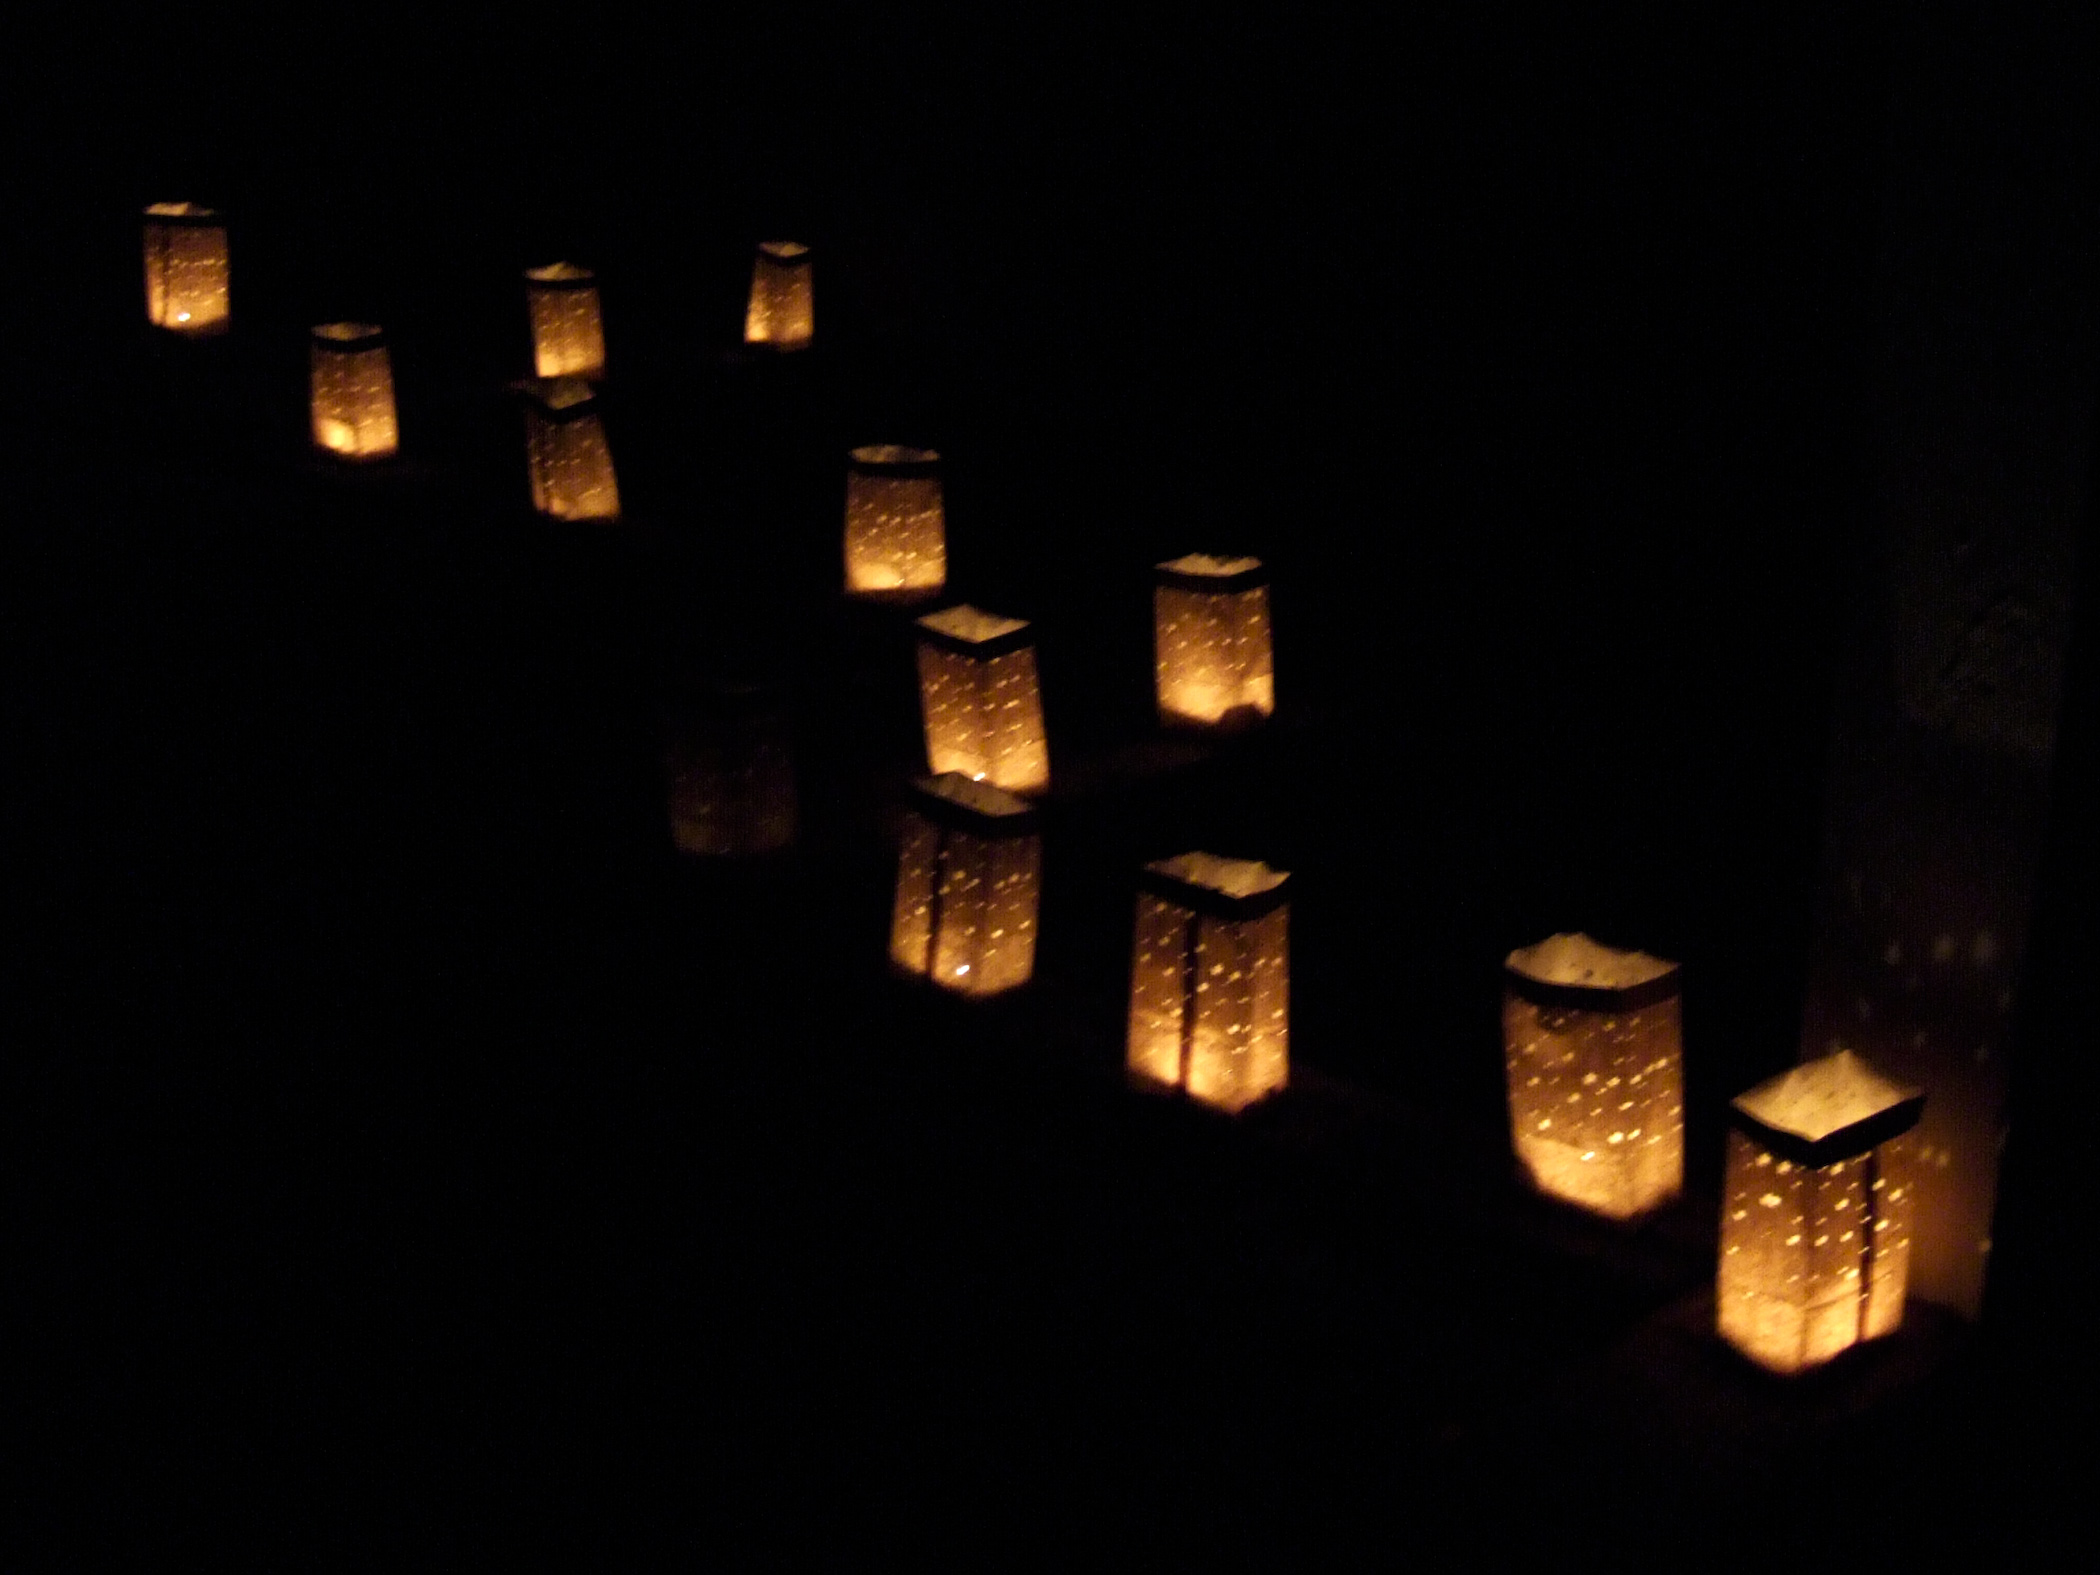 many paper lantern lights are lit in the dark